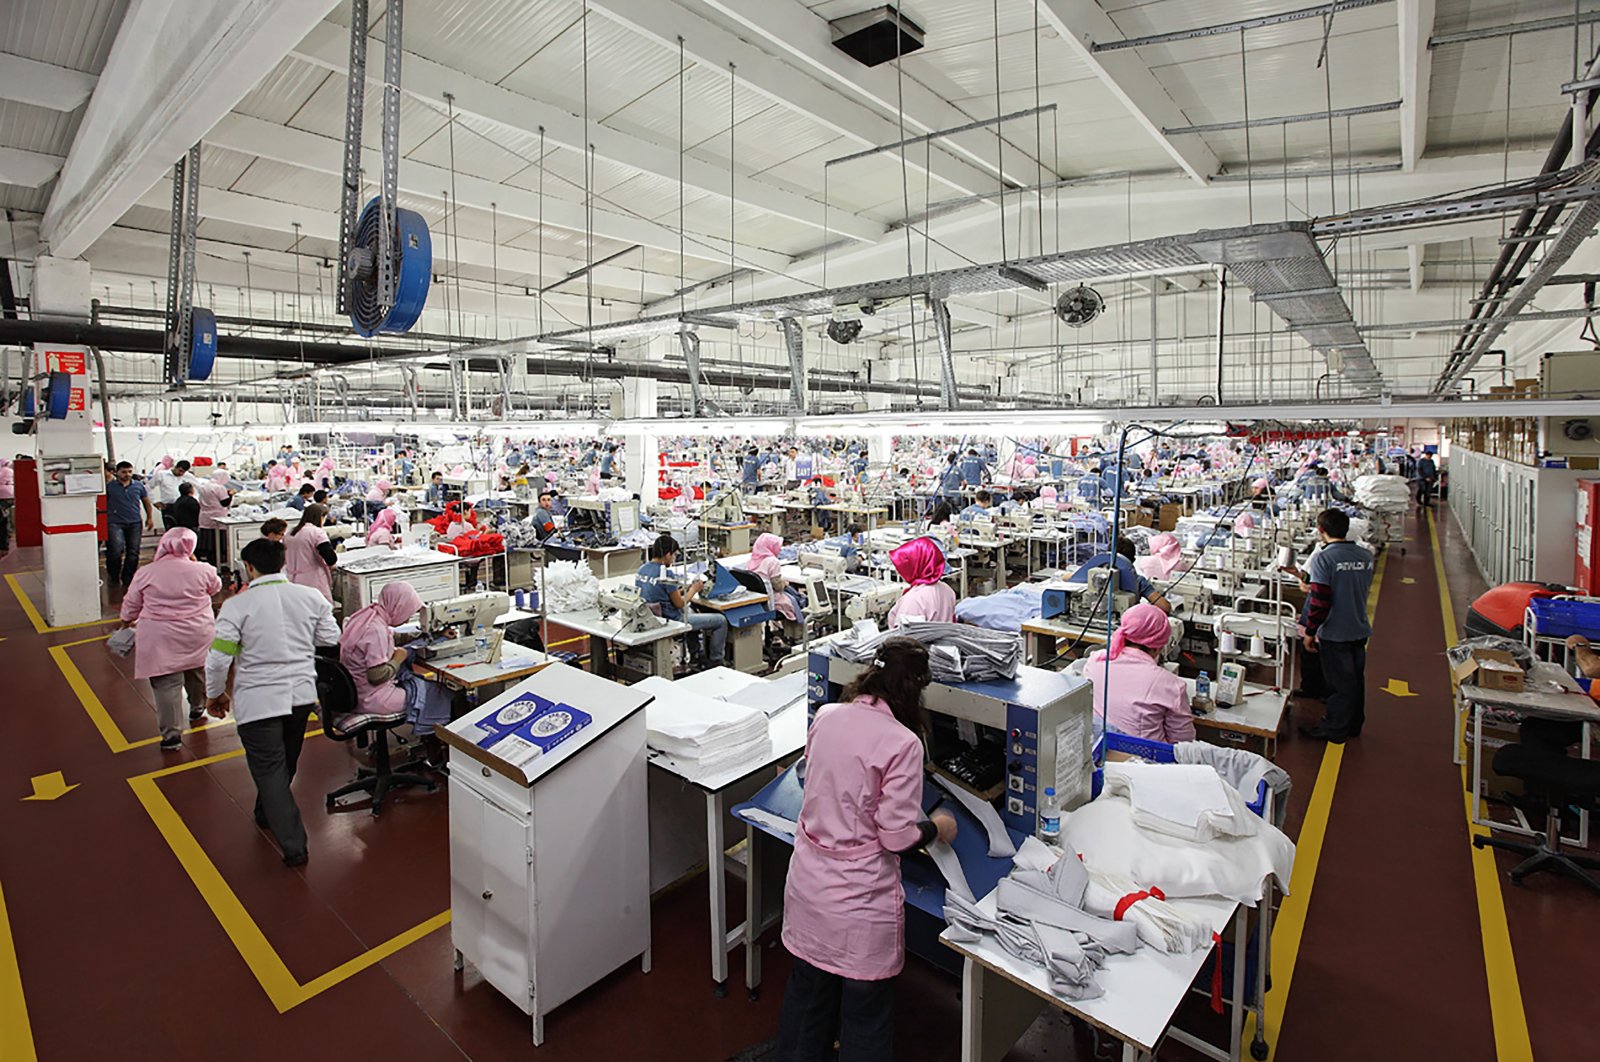 Workers producing garments at a textile factory in Turkey in this photo released on Aug. 16, 2019. (Sabah File Photo)